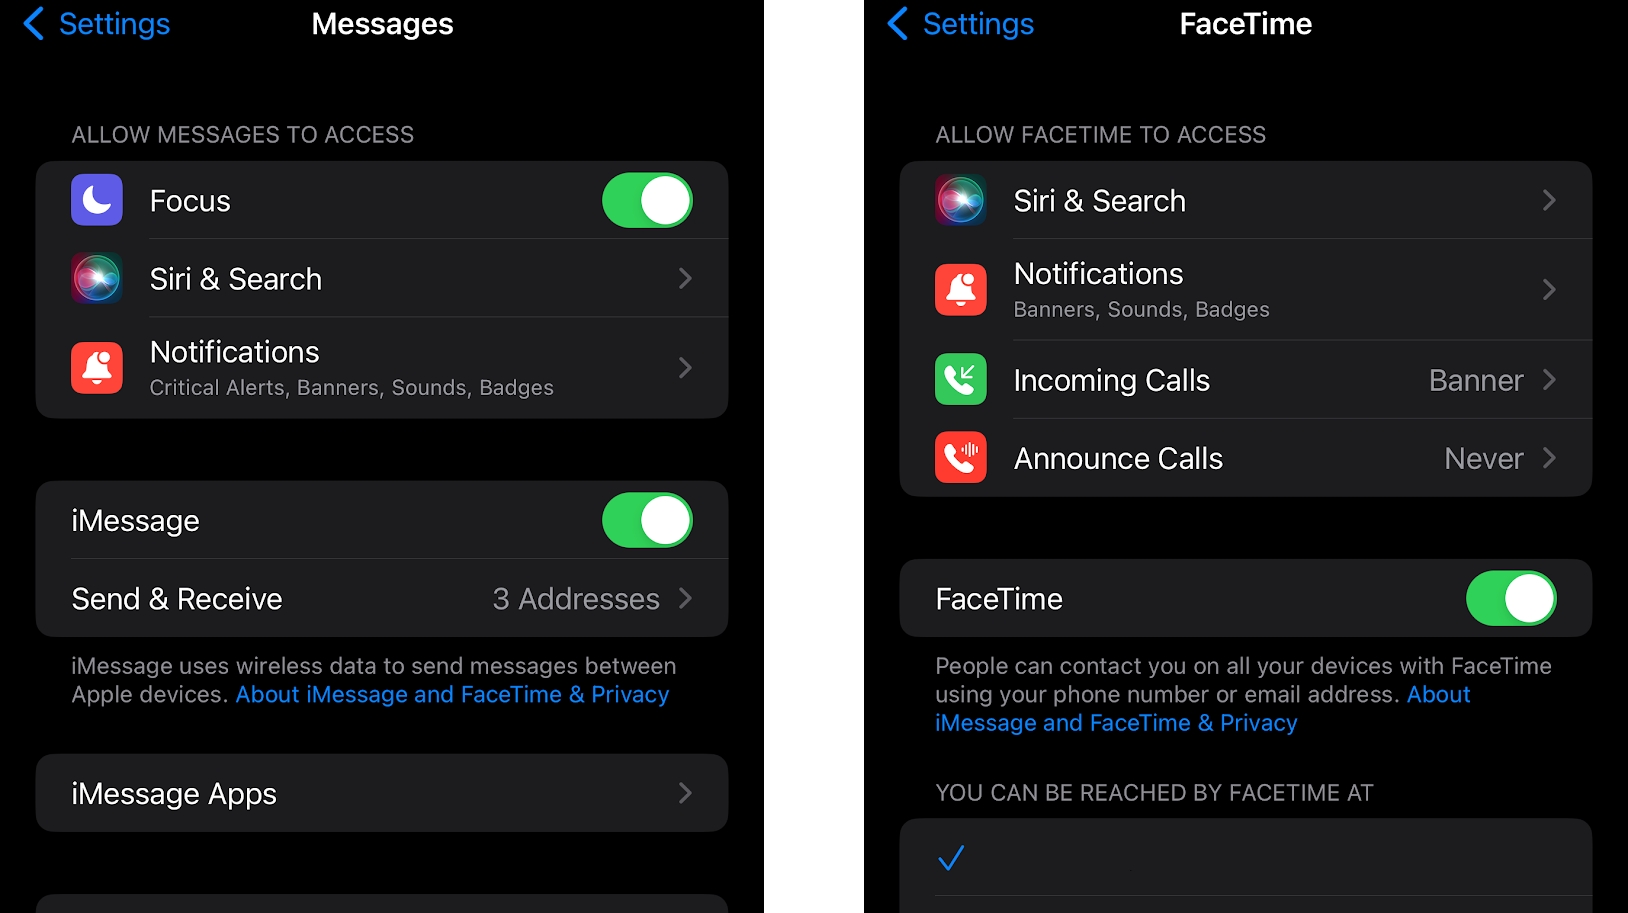 Screenshots showing iMessage and FaceTime toggles